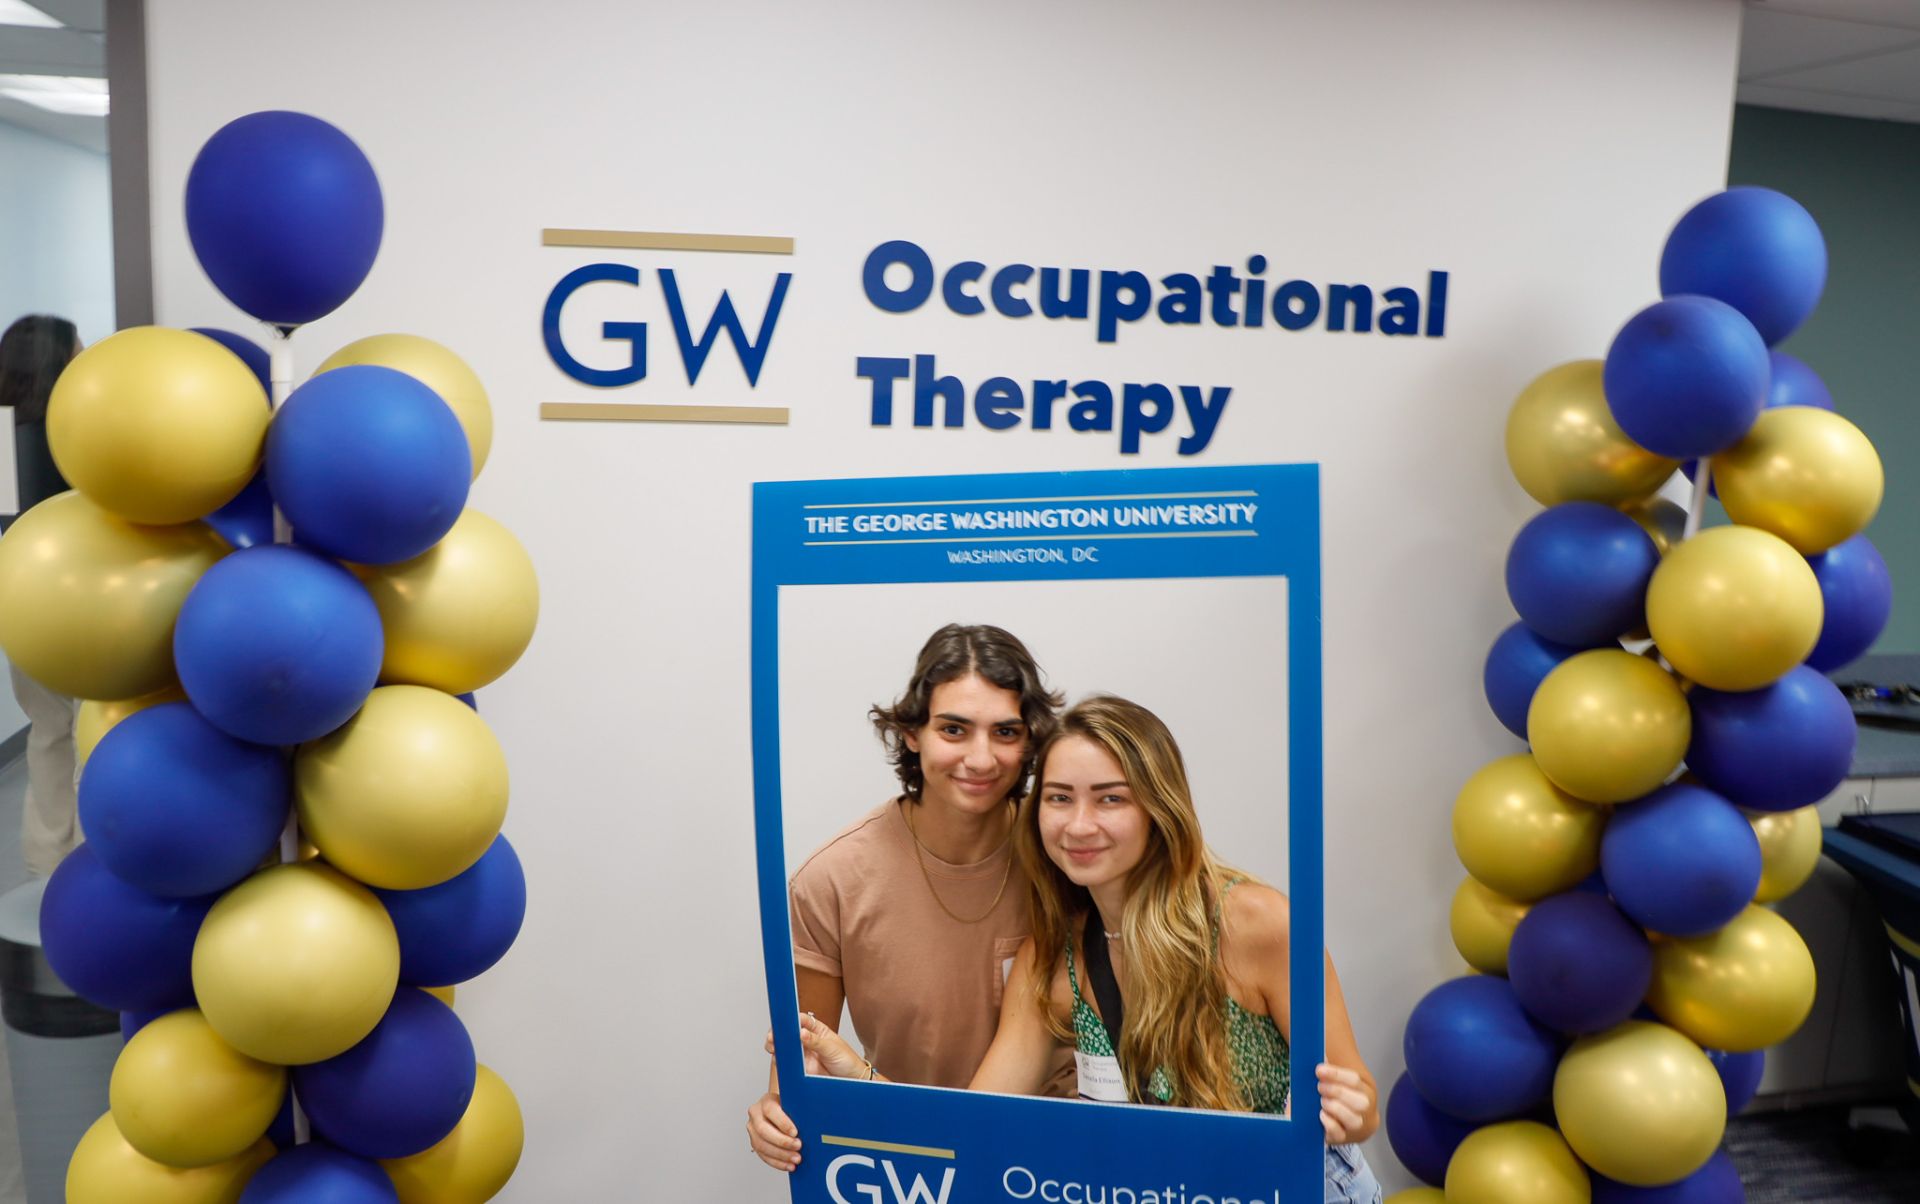 student and friend in front of GW OT sign and balloons